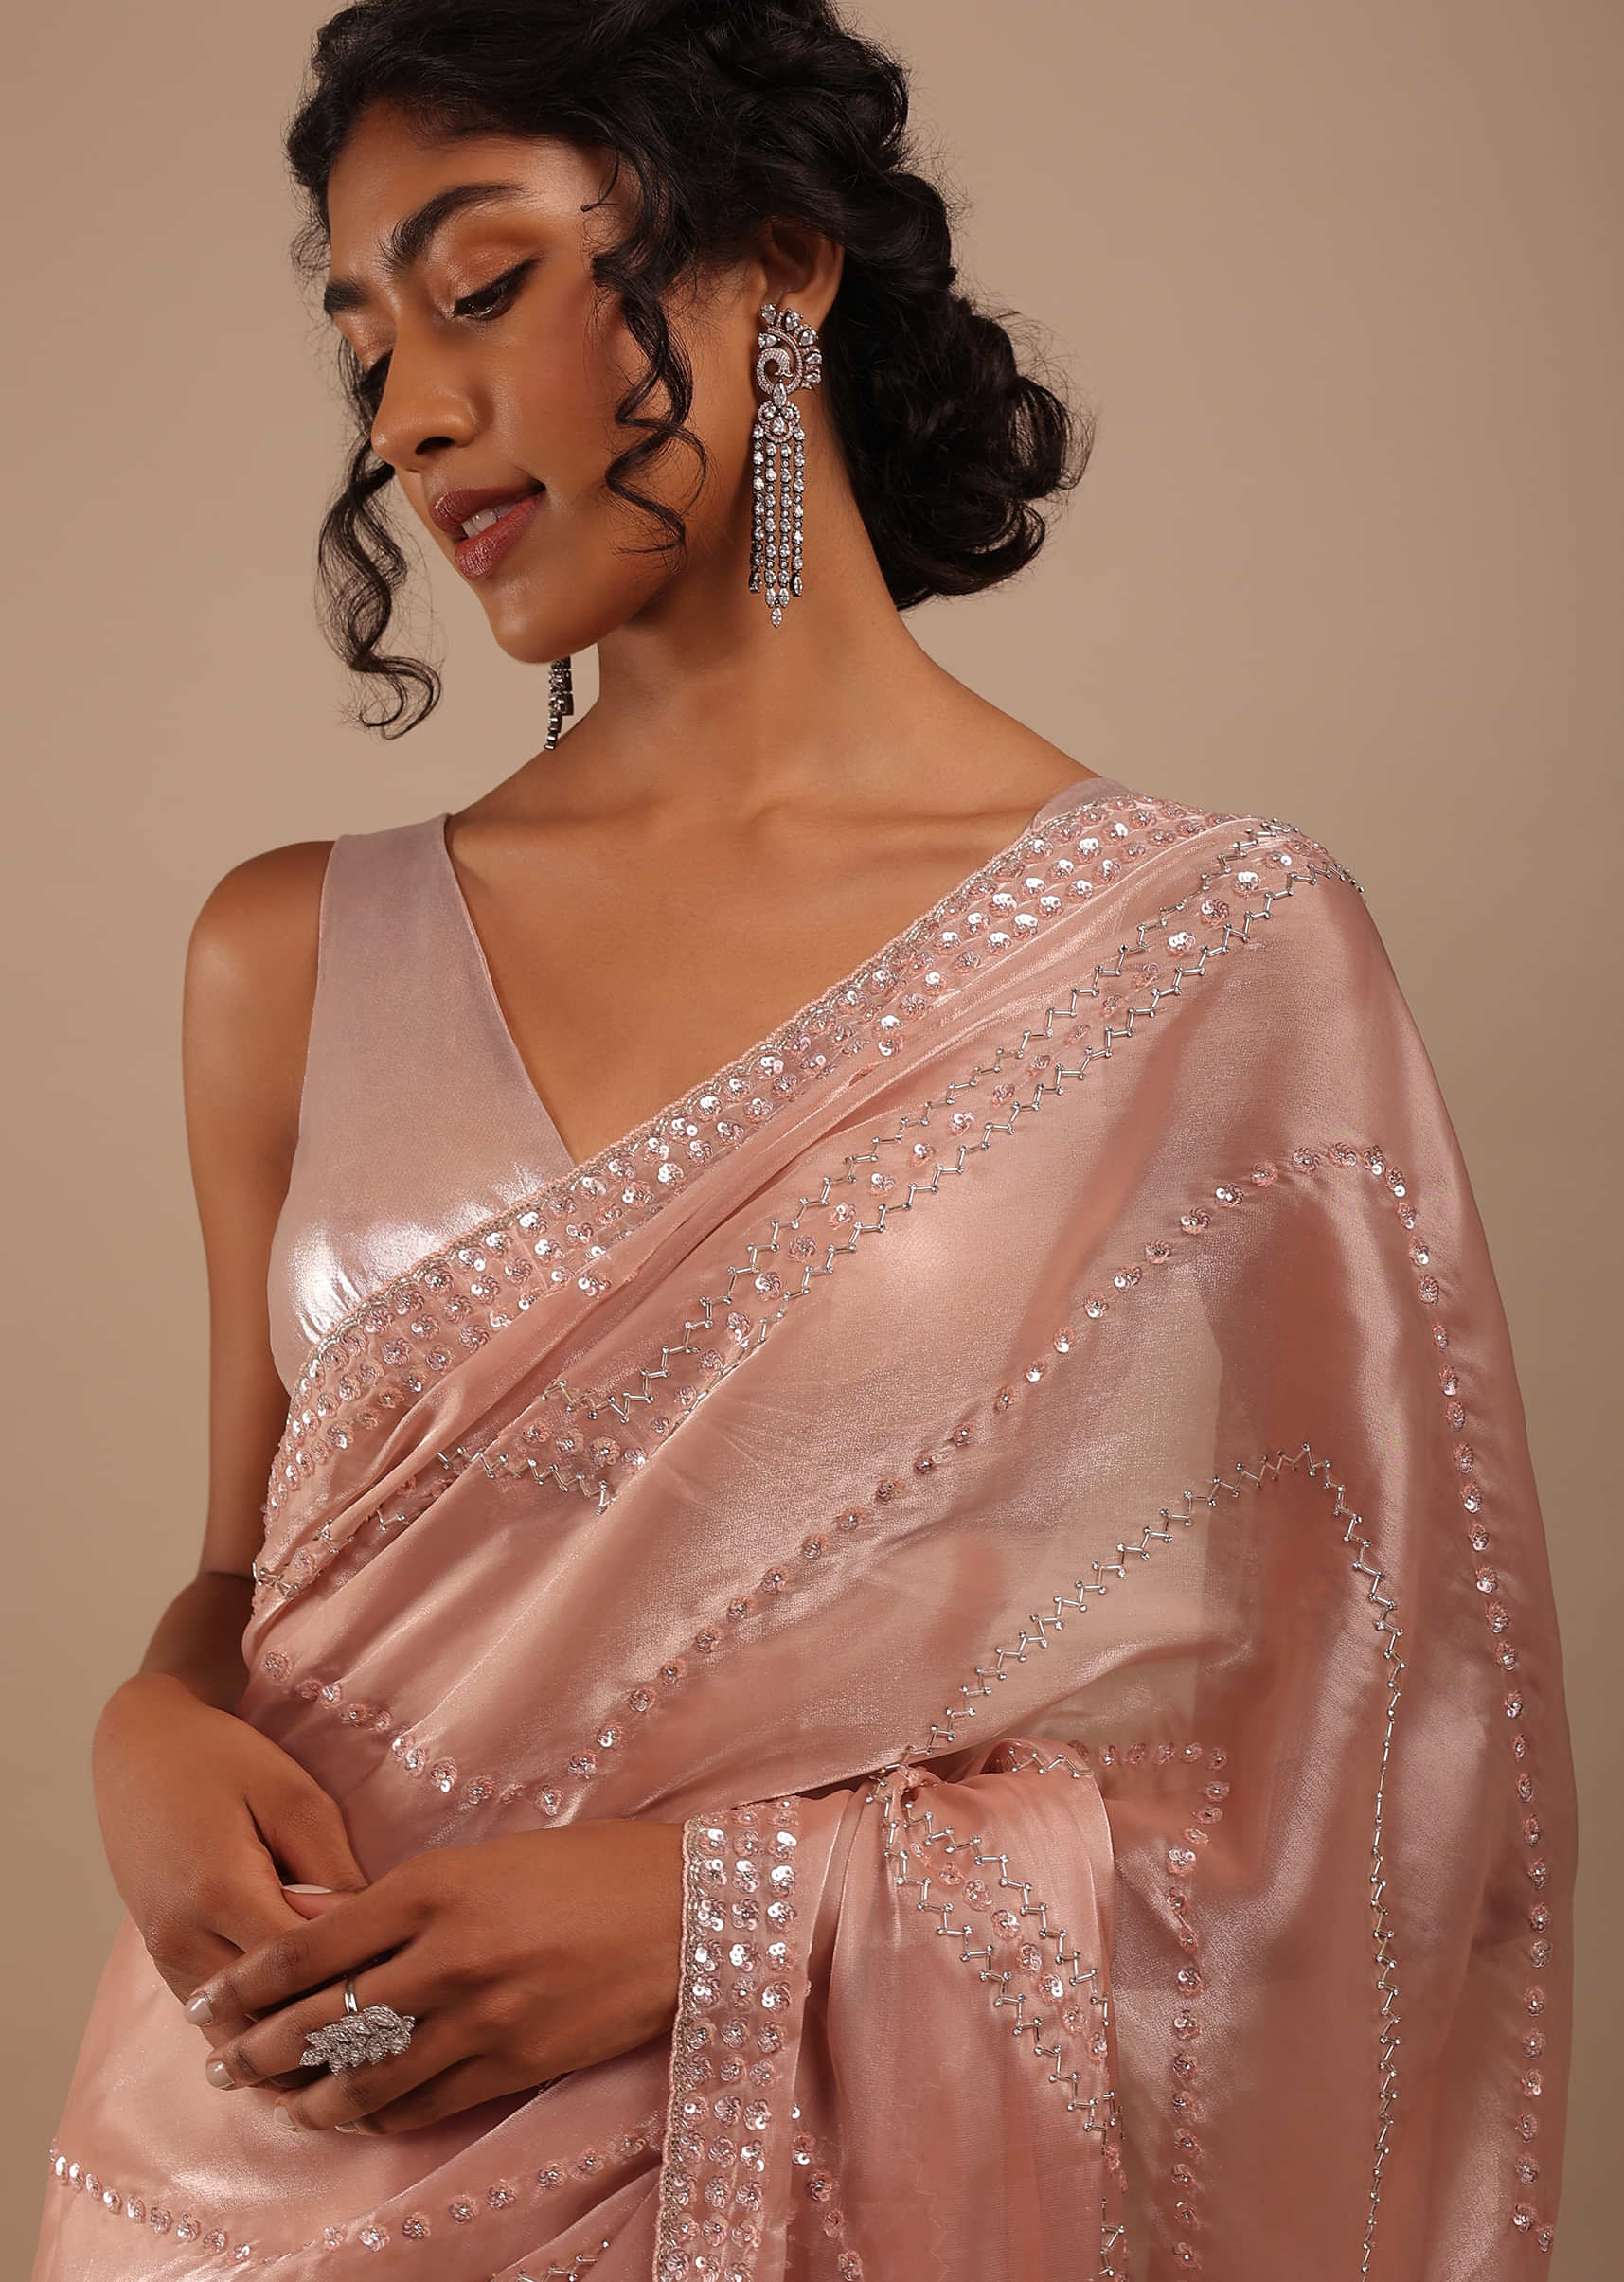 Powder Pink Tissue Organza Saree In Cut Dana Embroidery With Cutwork Detailing On The Border